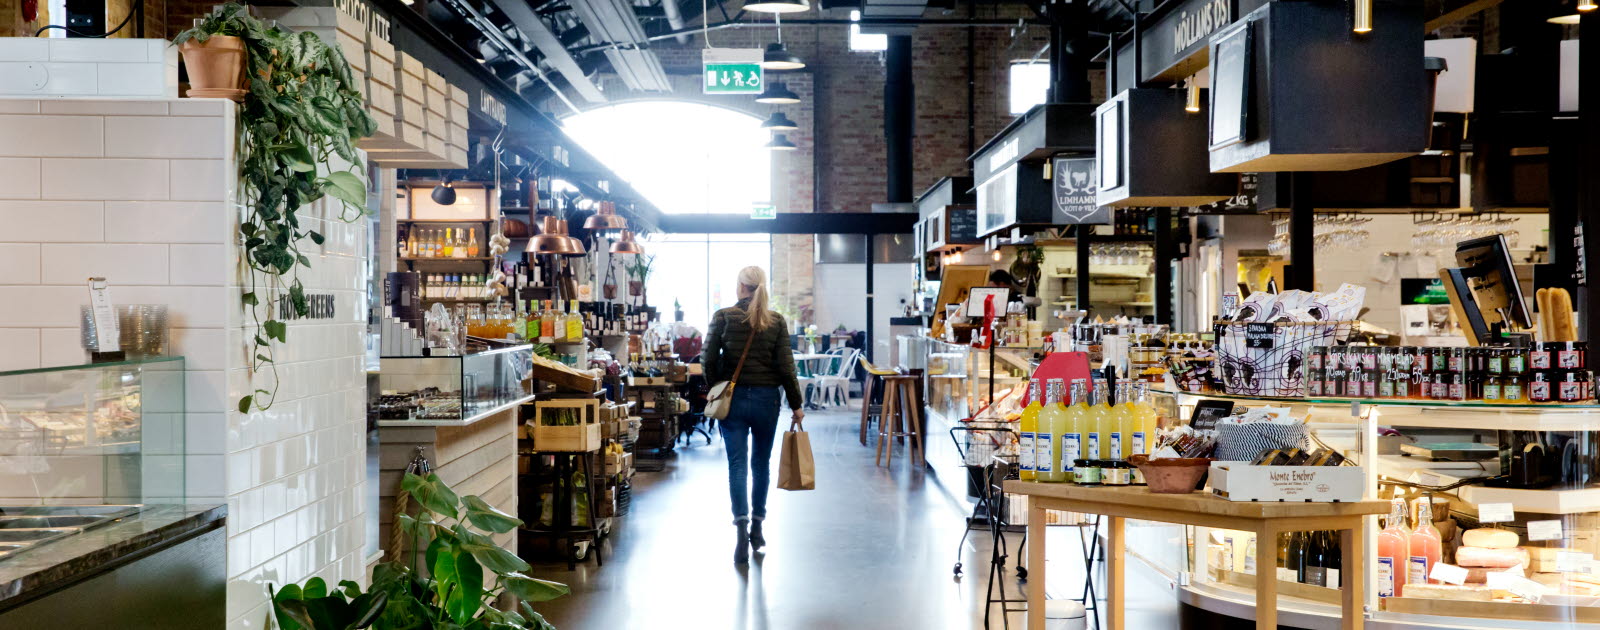 Malmö Saluhall is a popular food market hall housed in a former freight depot in the city center of Malmö. Guests will find anything from traditional Swedish food to poké bowls and freshly fried falafel here. The market hall has an interesting archit